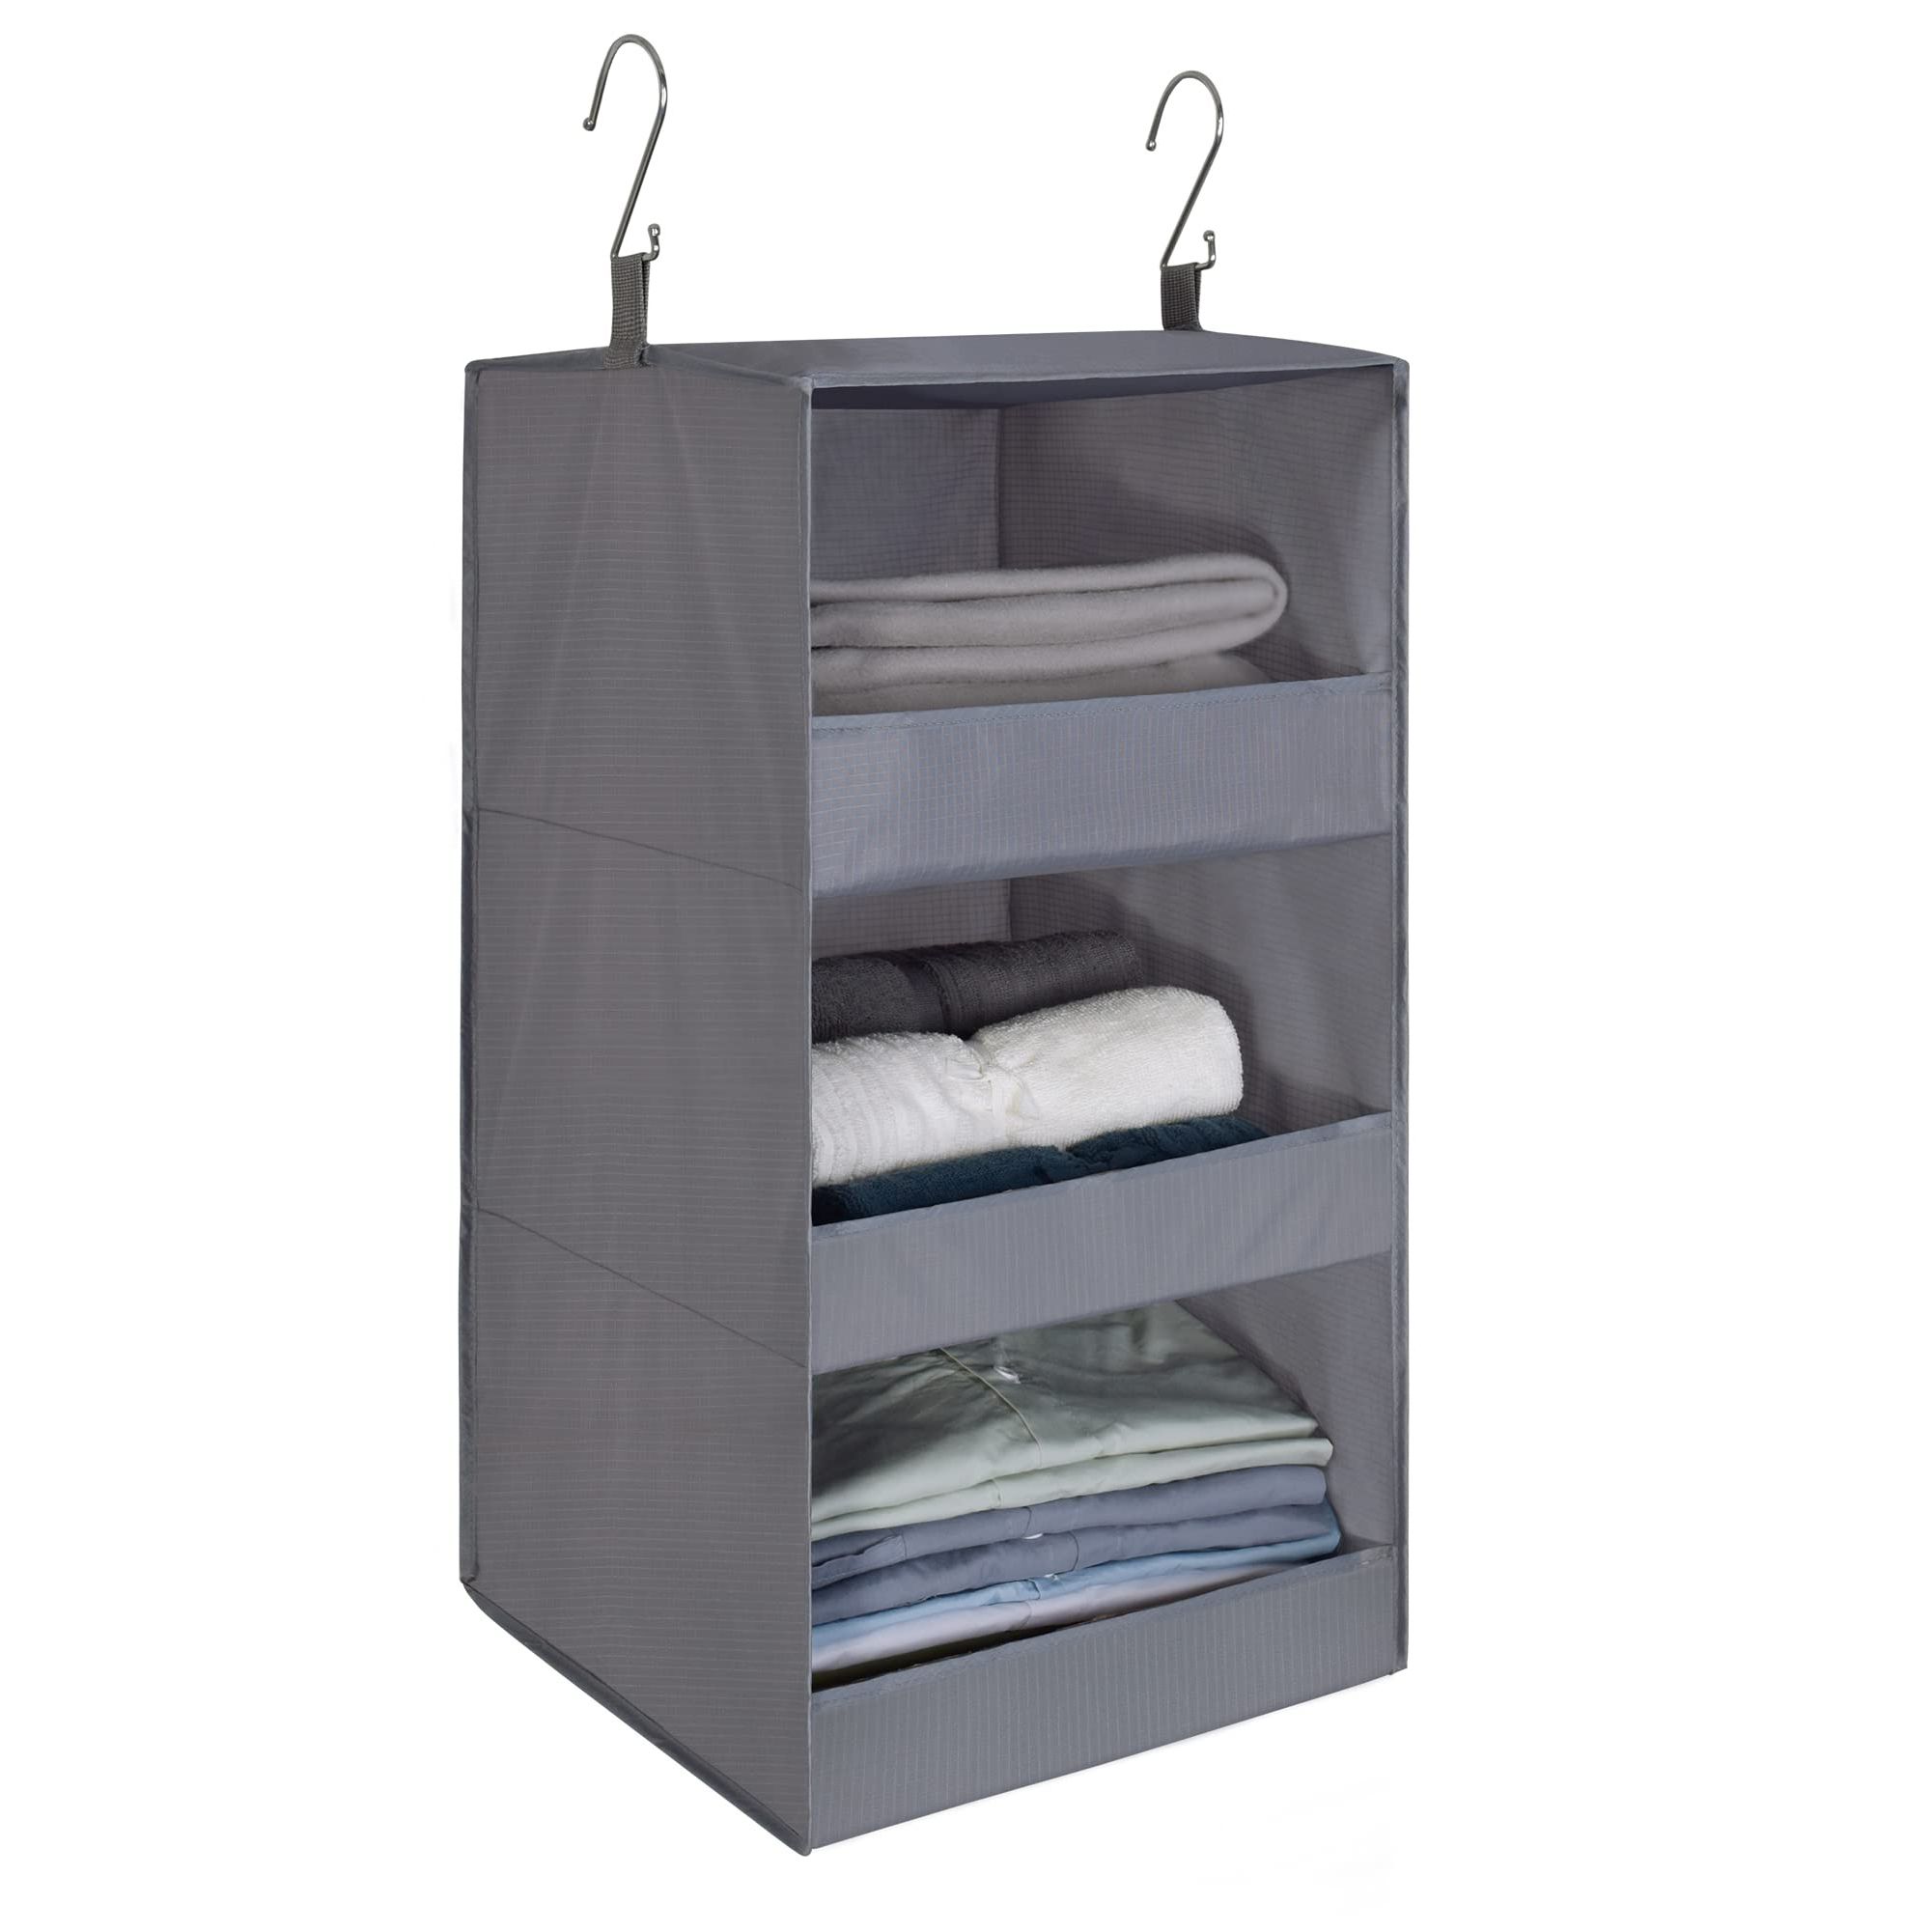 Famous Amazon: Granny Says 3 Shelf Hanging Closet Organizer And Storage,  Collapsible Hanging Closet Shelves, Hanging Organizer For Closet & Rv,  Gray, 29 ¾" H X 12" W X 12" D, 1 Pack : Home & Kitchen For 3 Shelf Hanging Shelves Wardrobes (Photo 5 of 10)